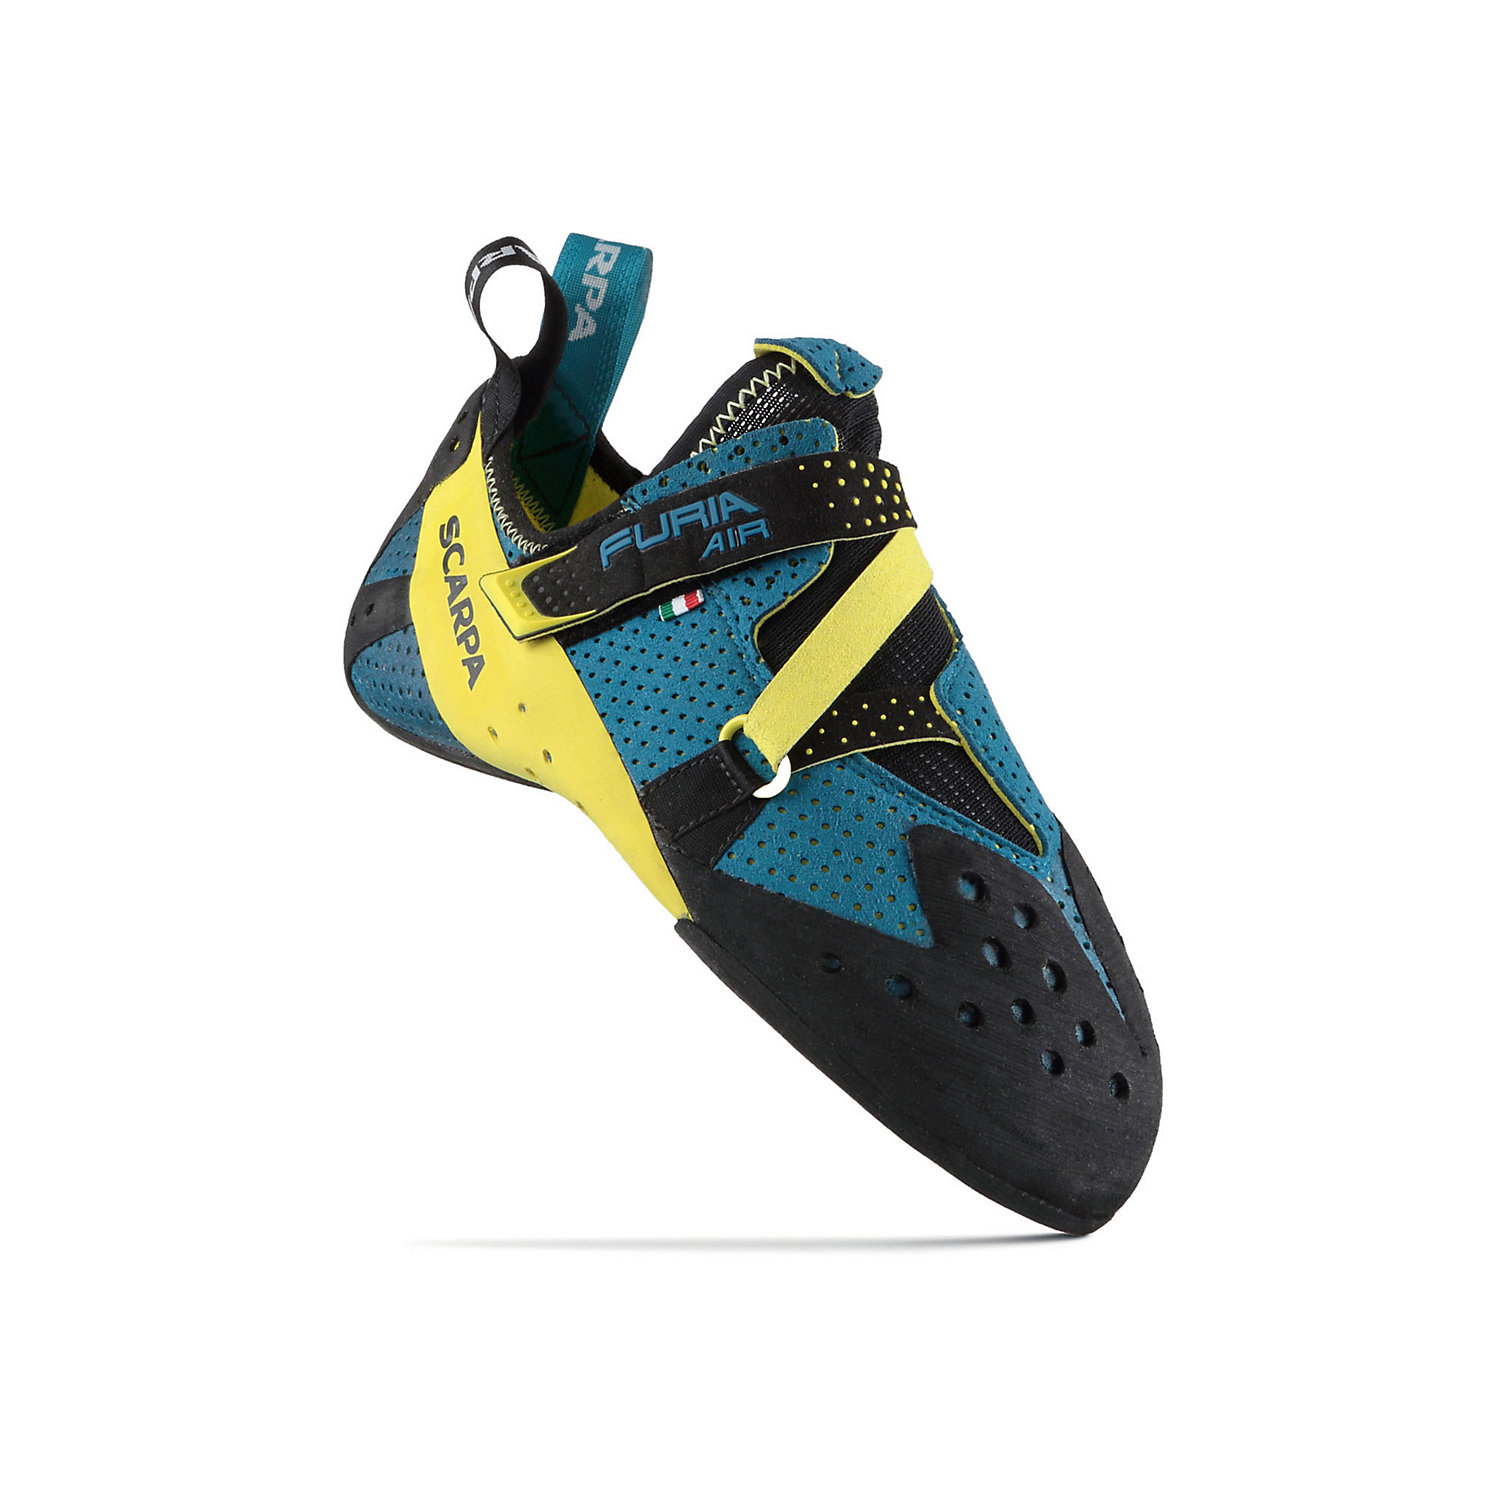 Specialized Performance for Sensitivity and Breathability SCARPA Furia Air Rock Climbing Shoes for Sport Climbing and Bouldering 